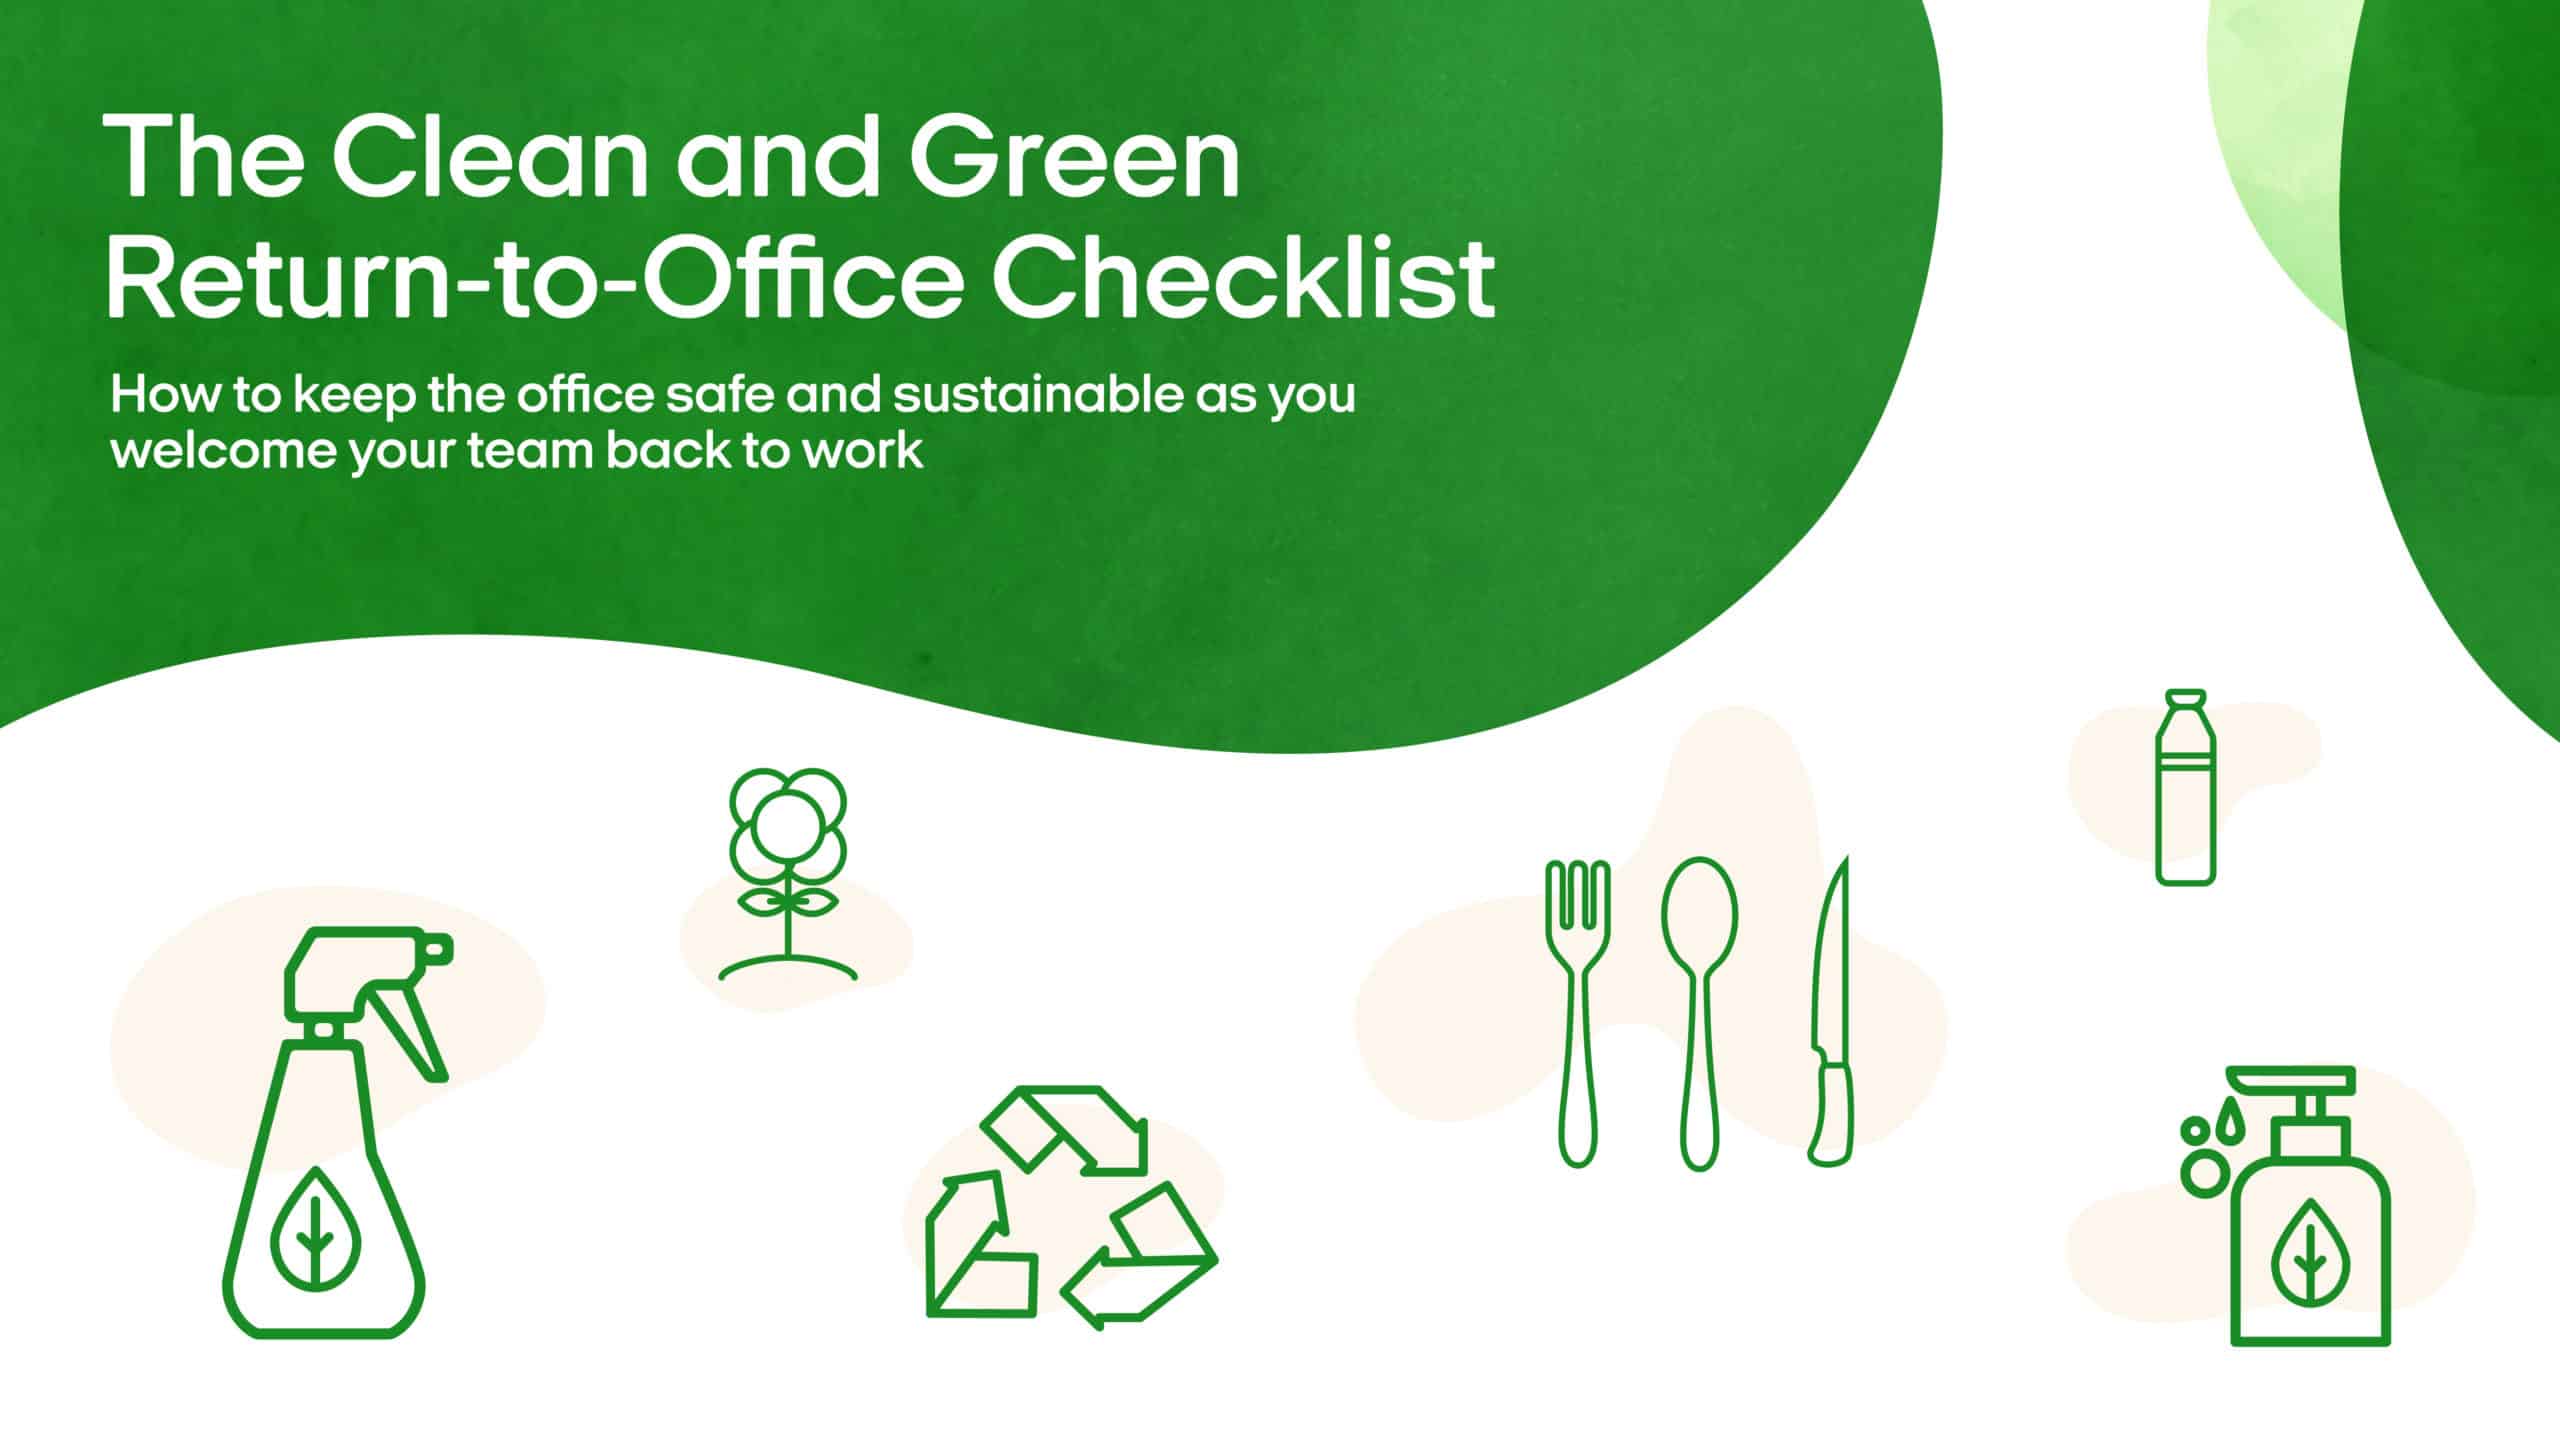 How to Stay Green and Clean when you Return to the Office